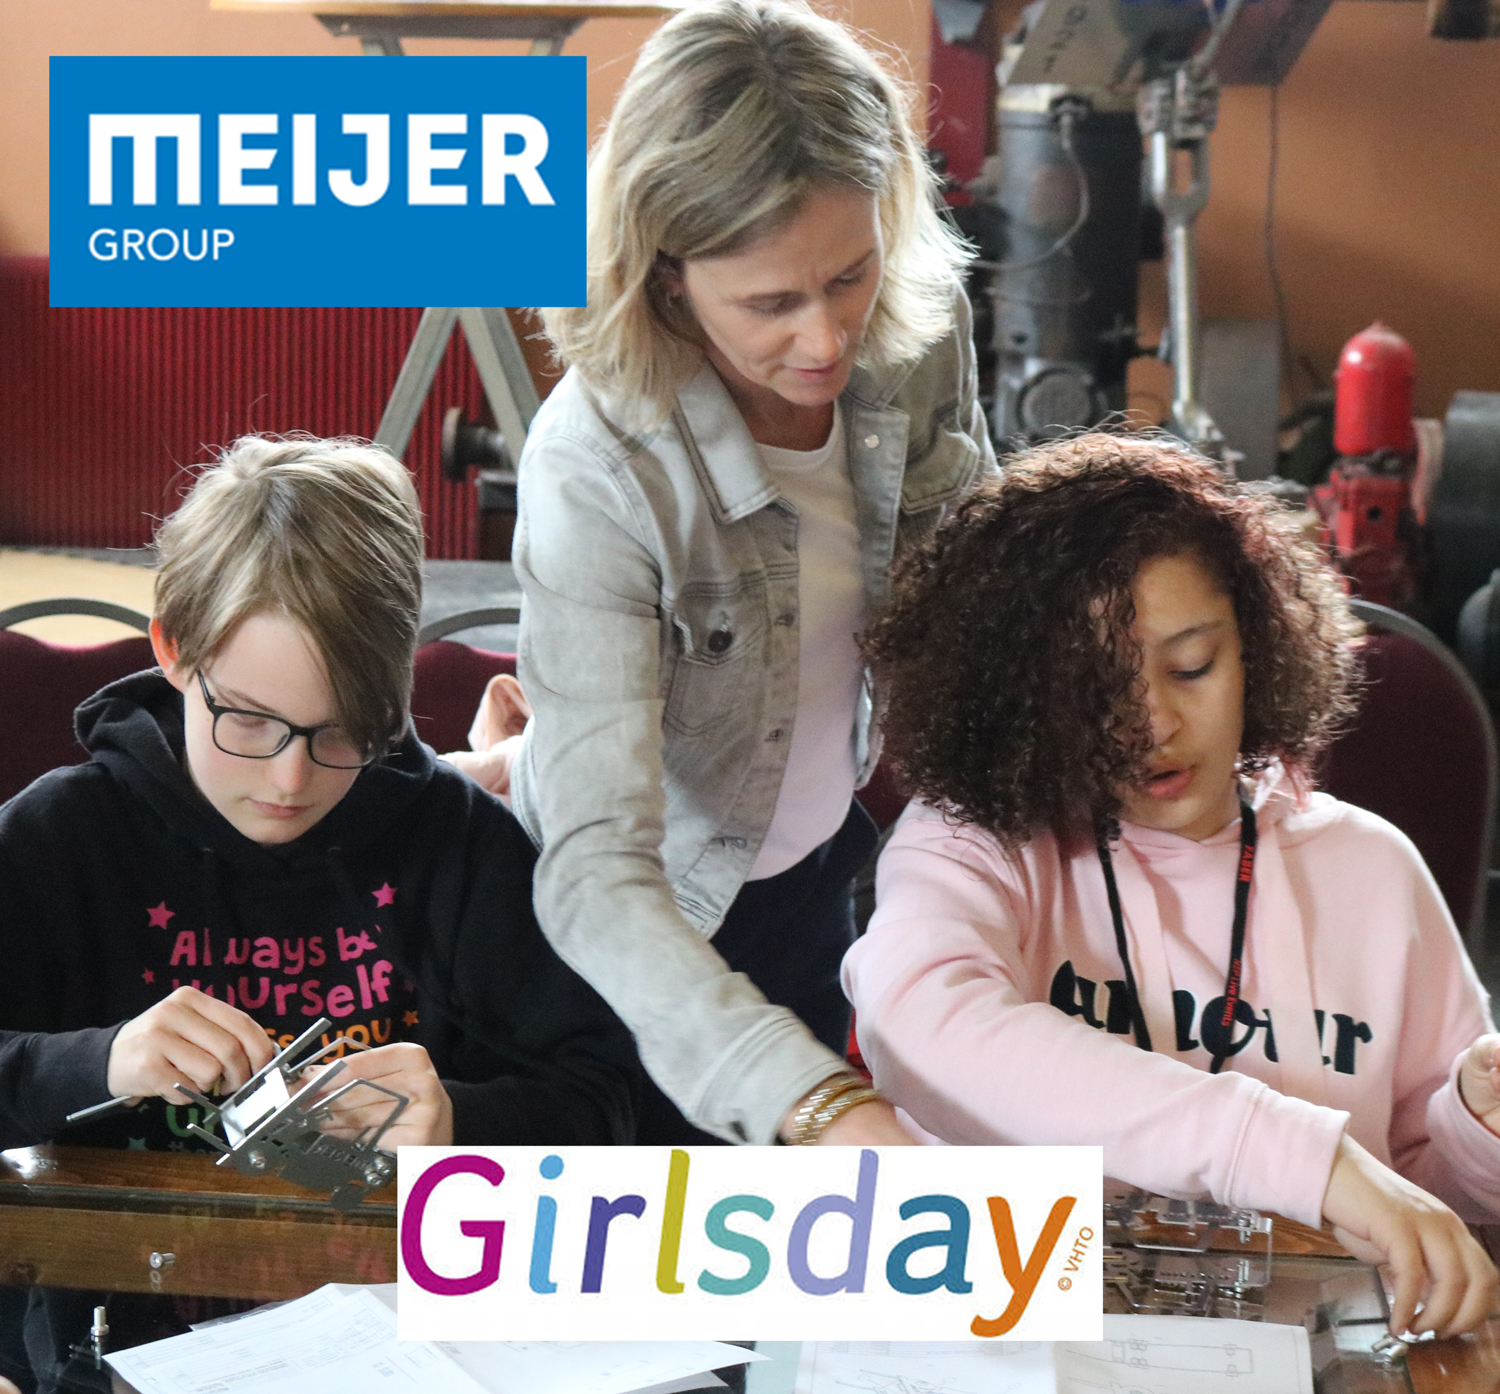 Meijer Girls' day promotes the employment of more women in engineering.